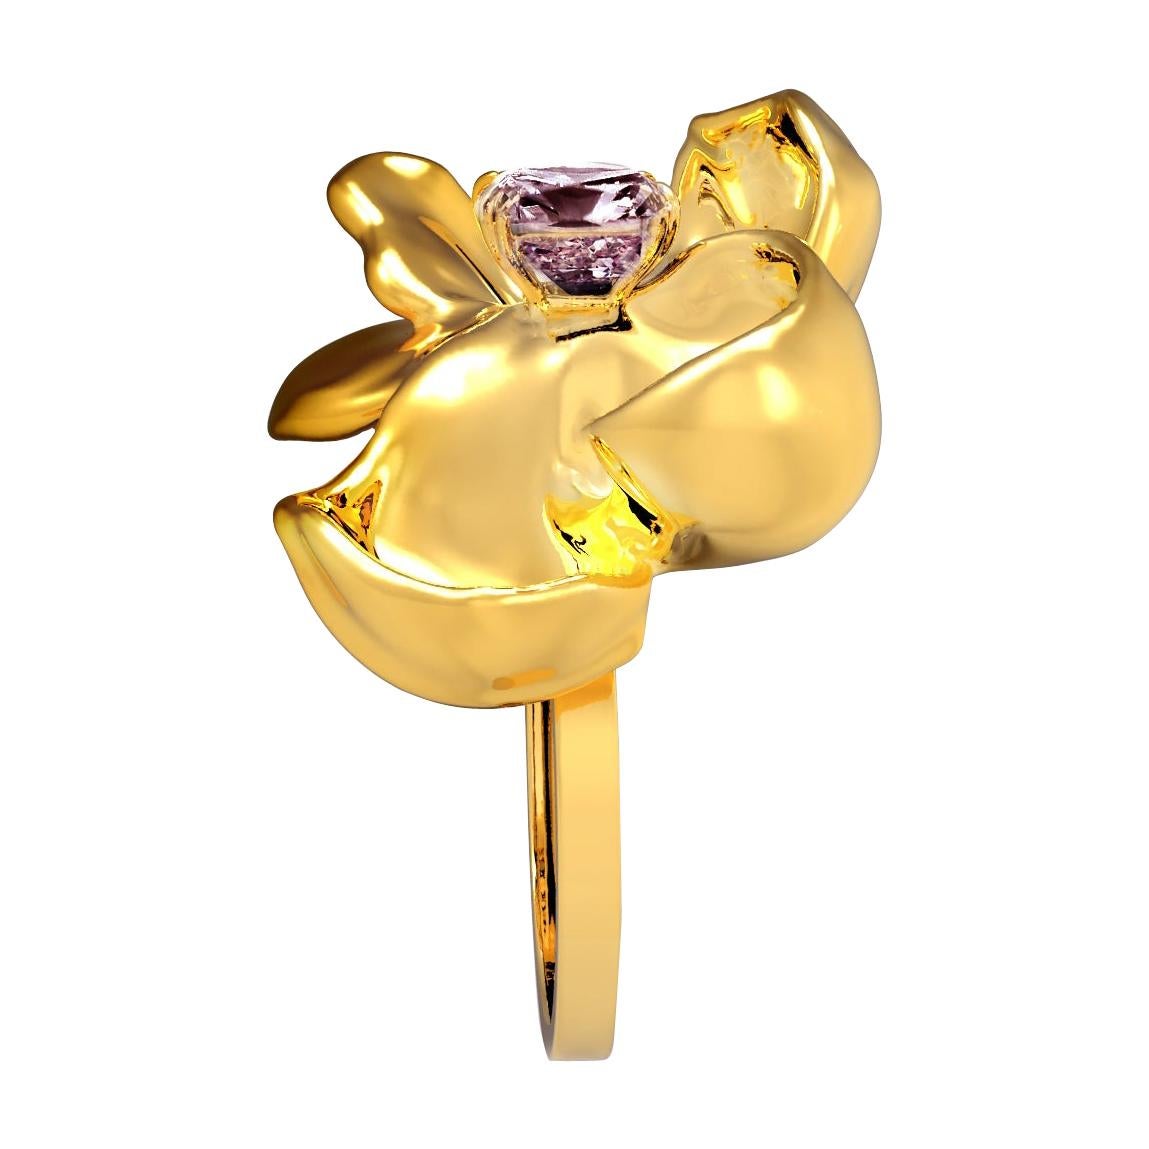 This contemporary Magnolia Flower cocktail ring is crafted in 18 karat yellow gold and features a stunning berry purple cushion spinel weighing 1.7 carats. The water-surface of the spinel amplifies the light, creating a stunning reflection on the